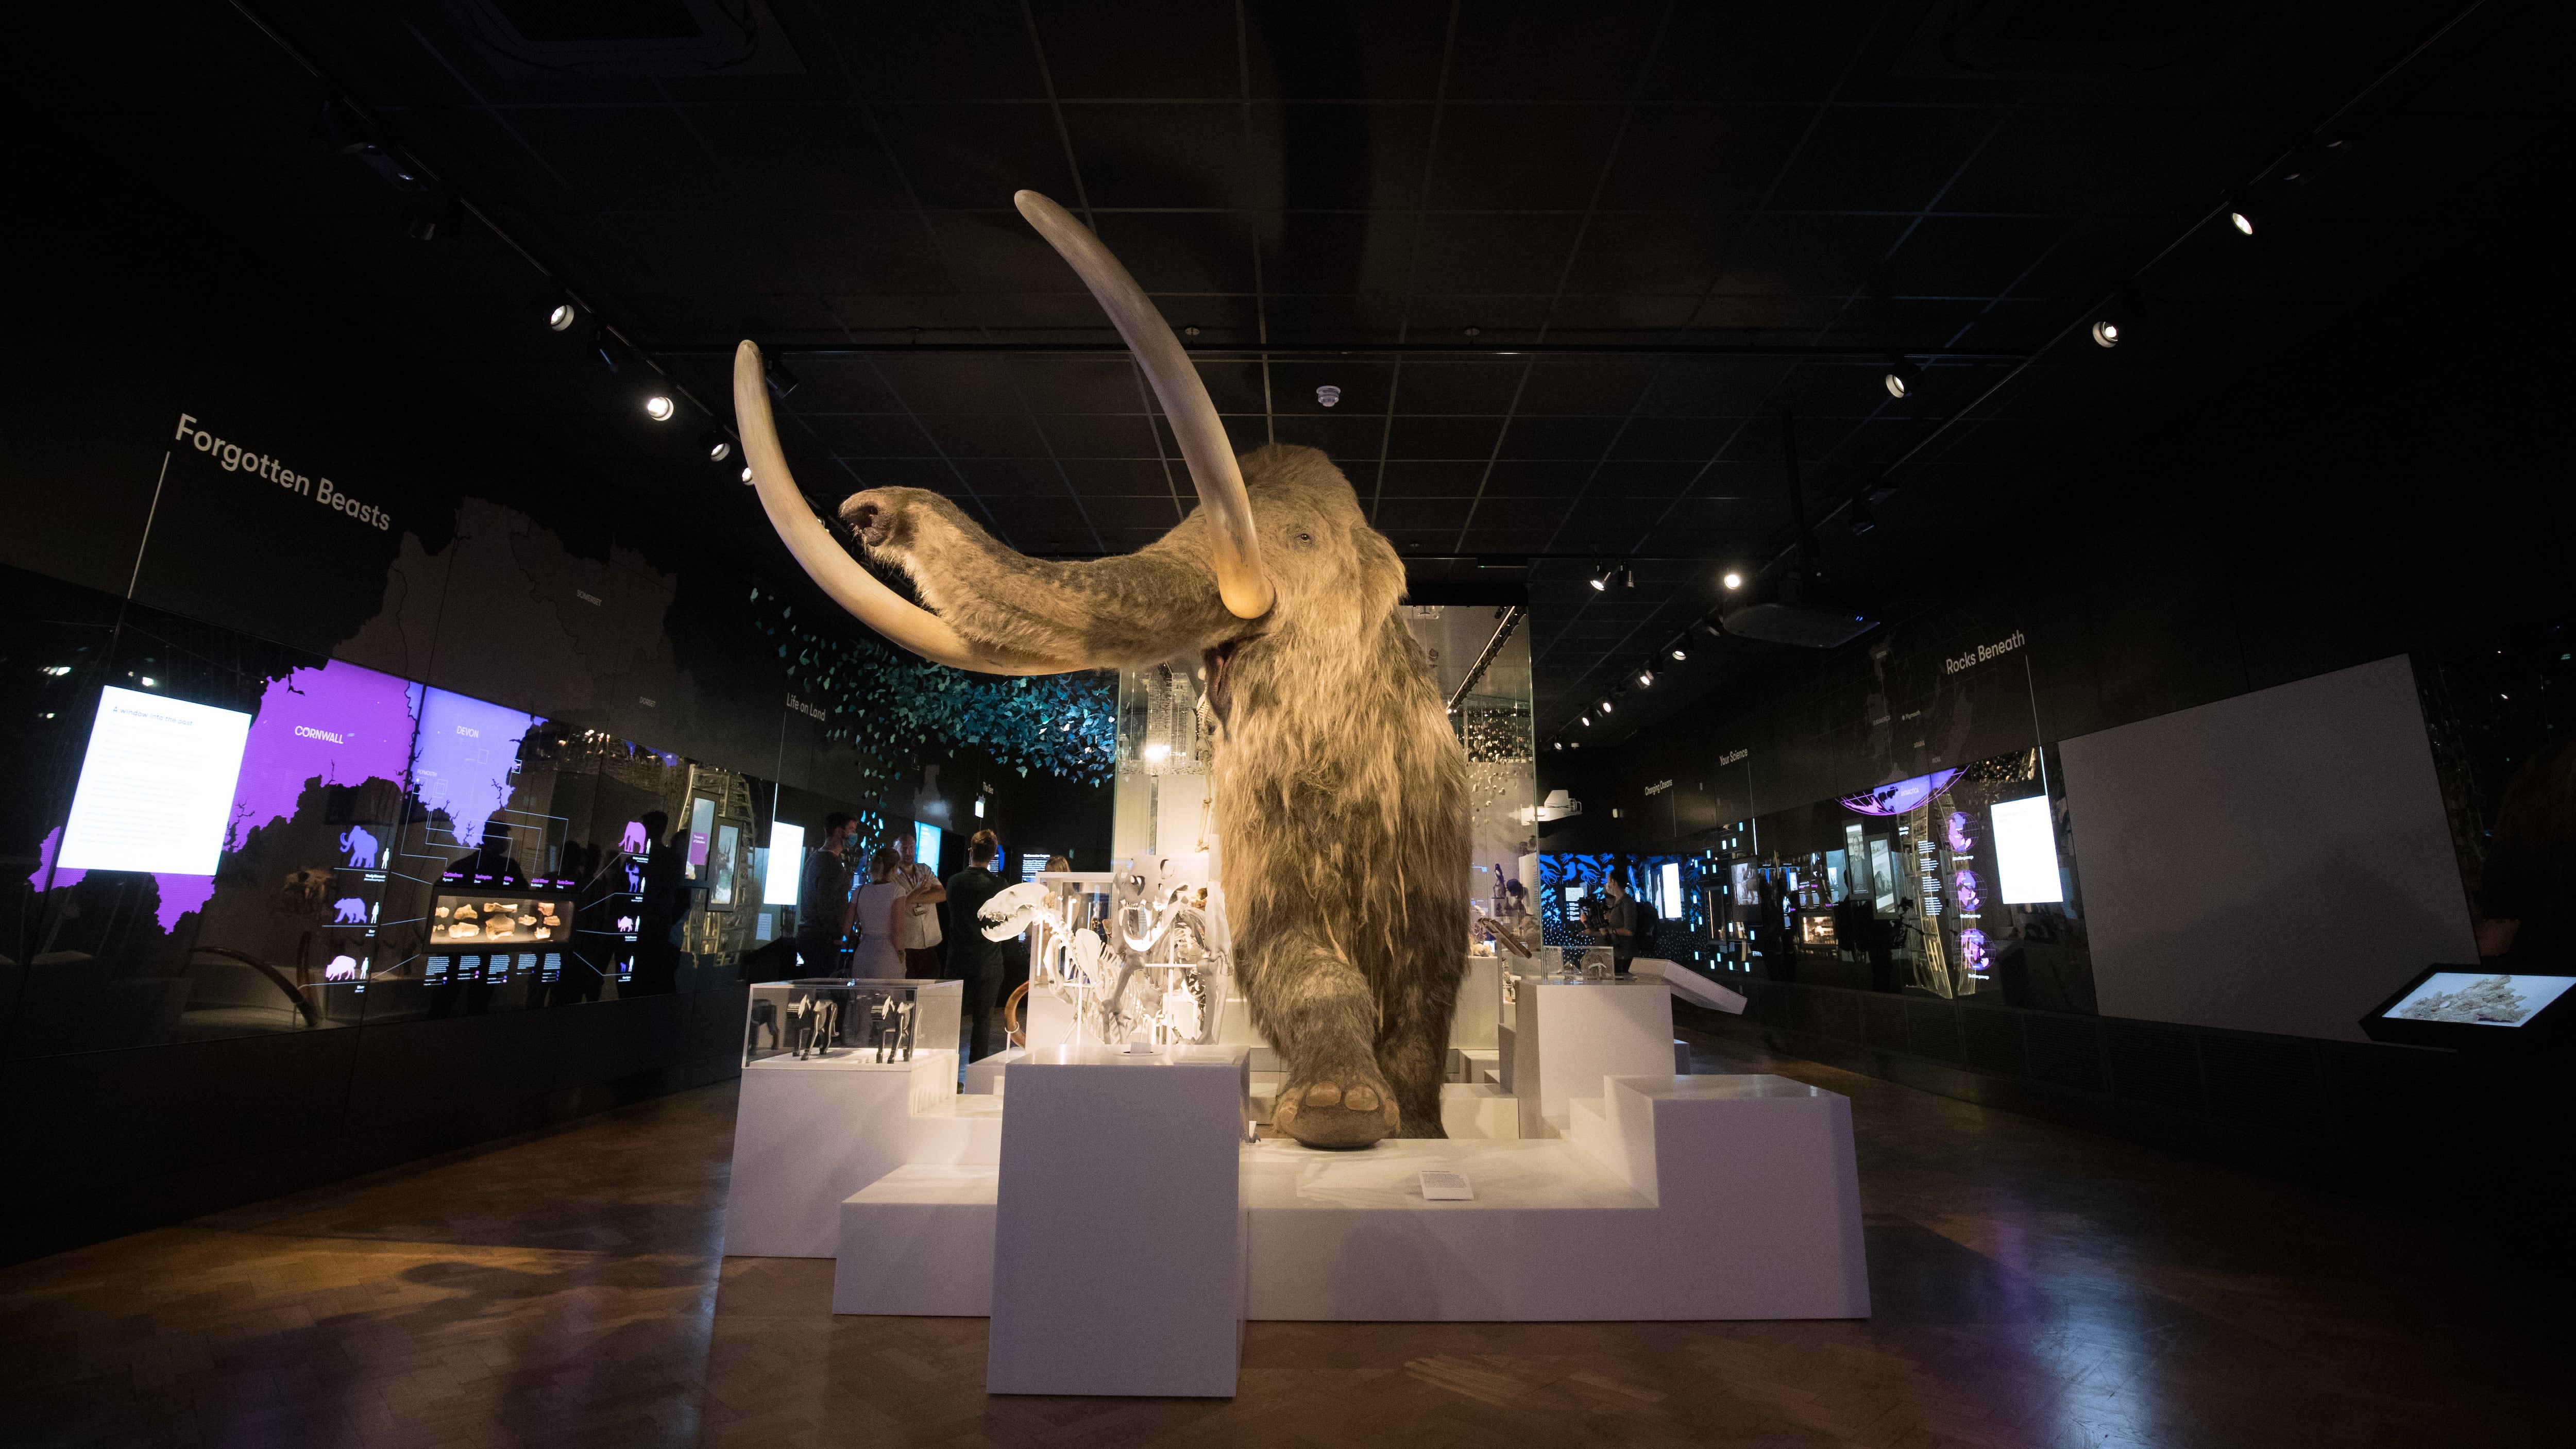 Researchers said the last surviving woolly mammoths were inbred but not doomed to extinction